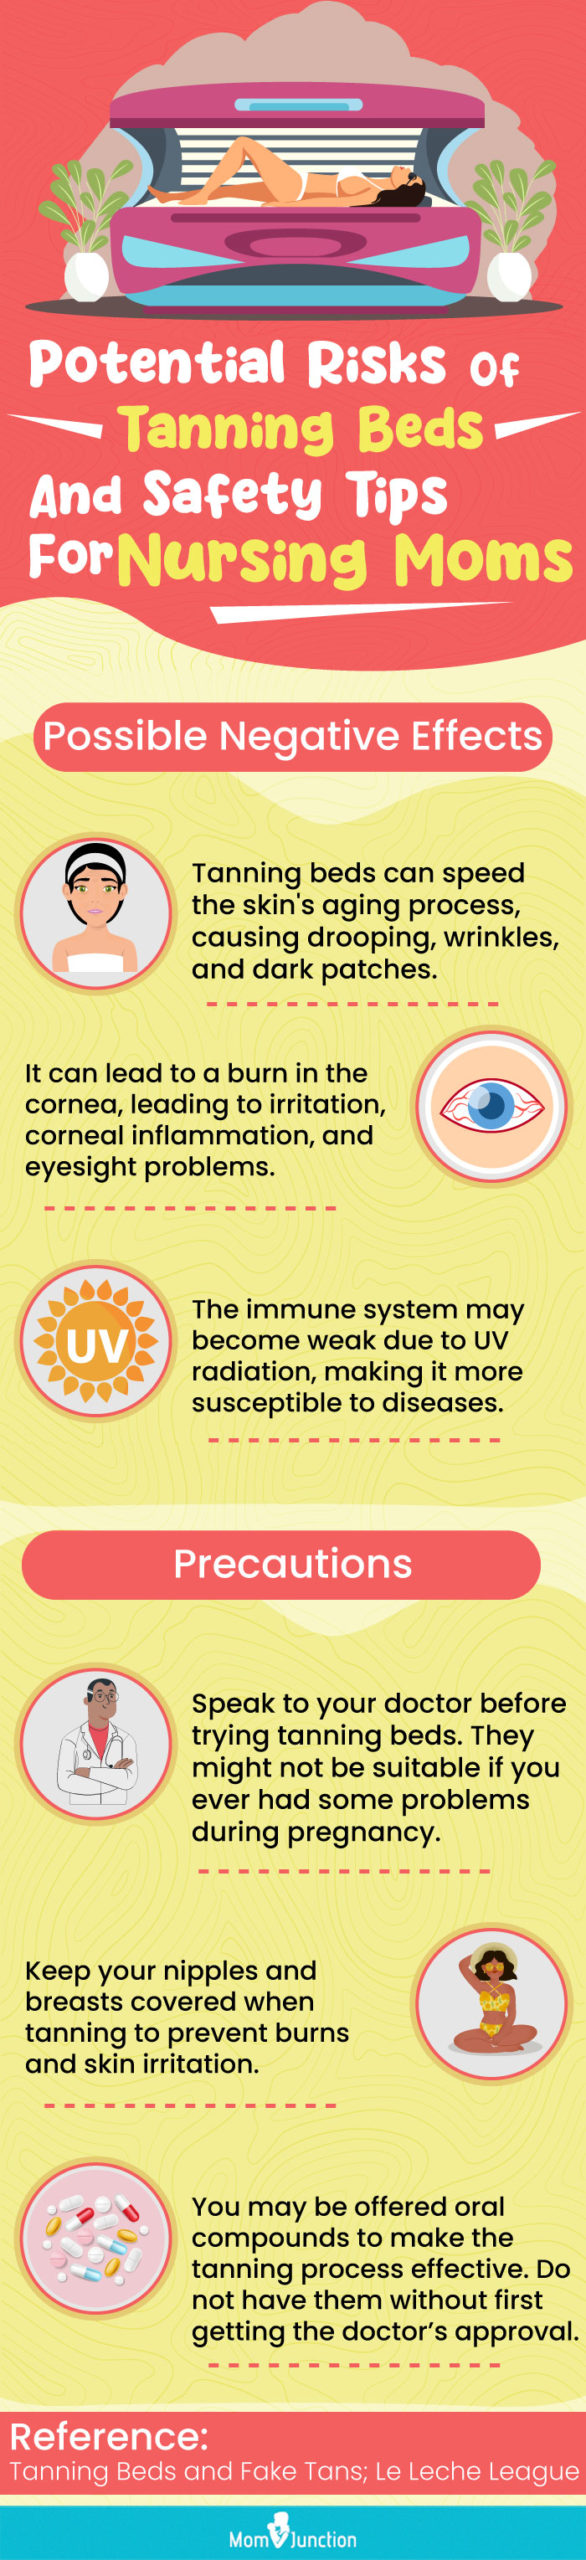 potential risks of tanning beds and safety tips for nursing moms (infographic)